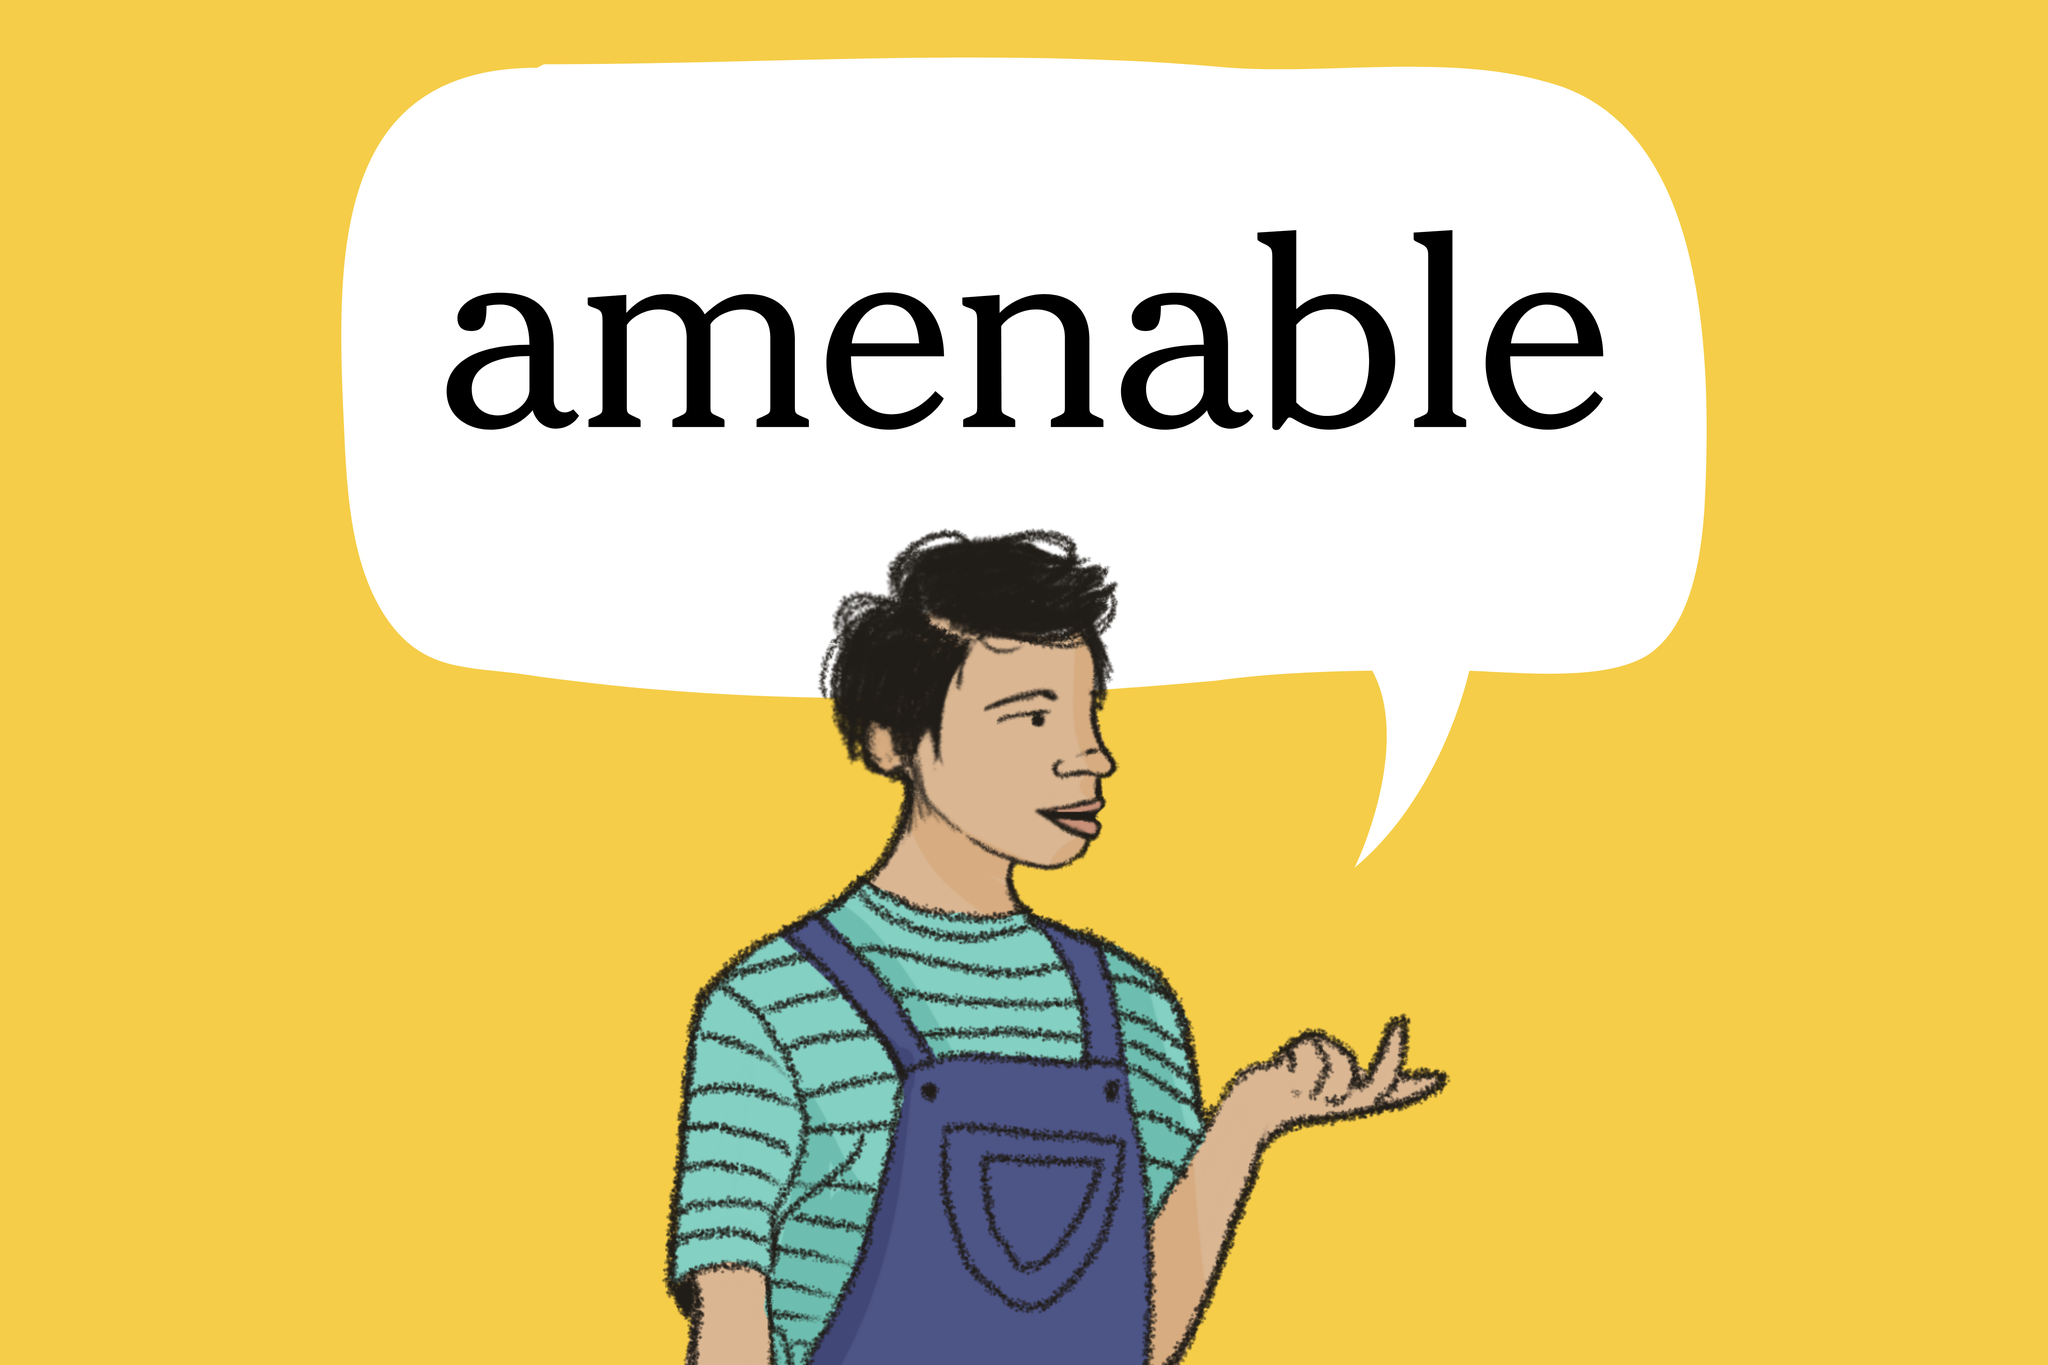 amenable meaning in english